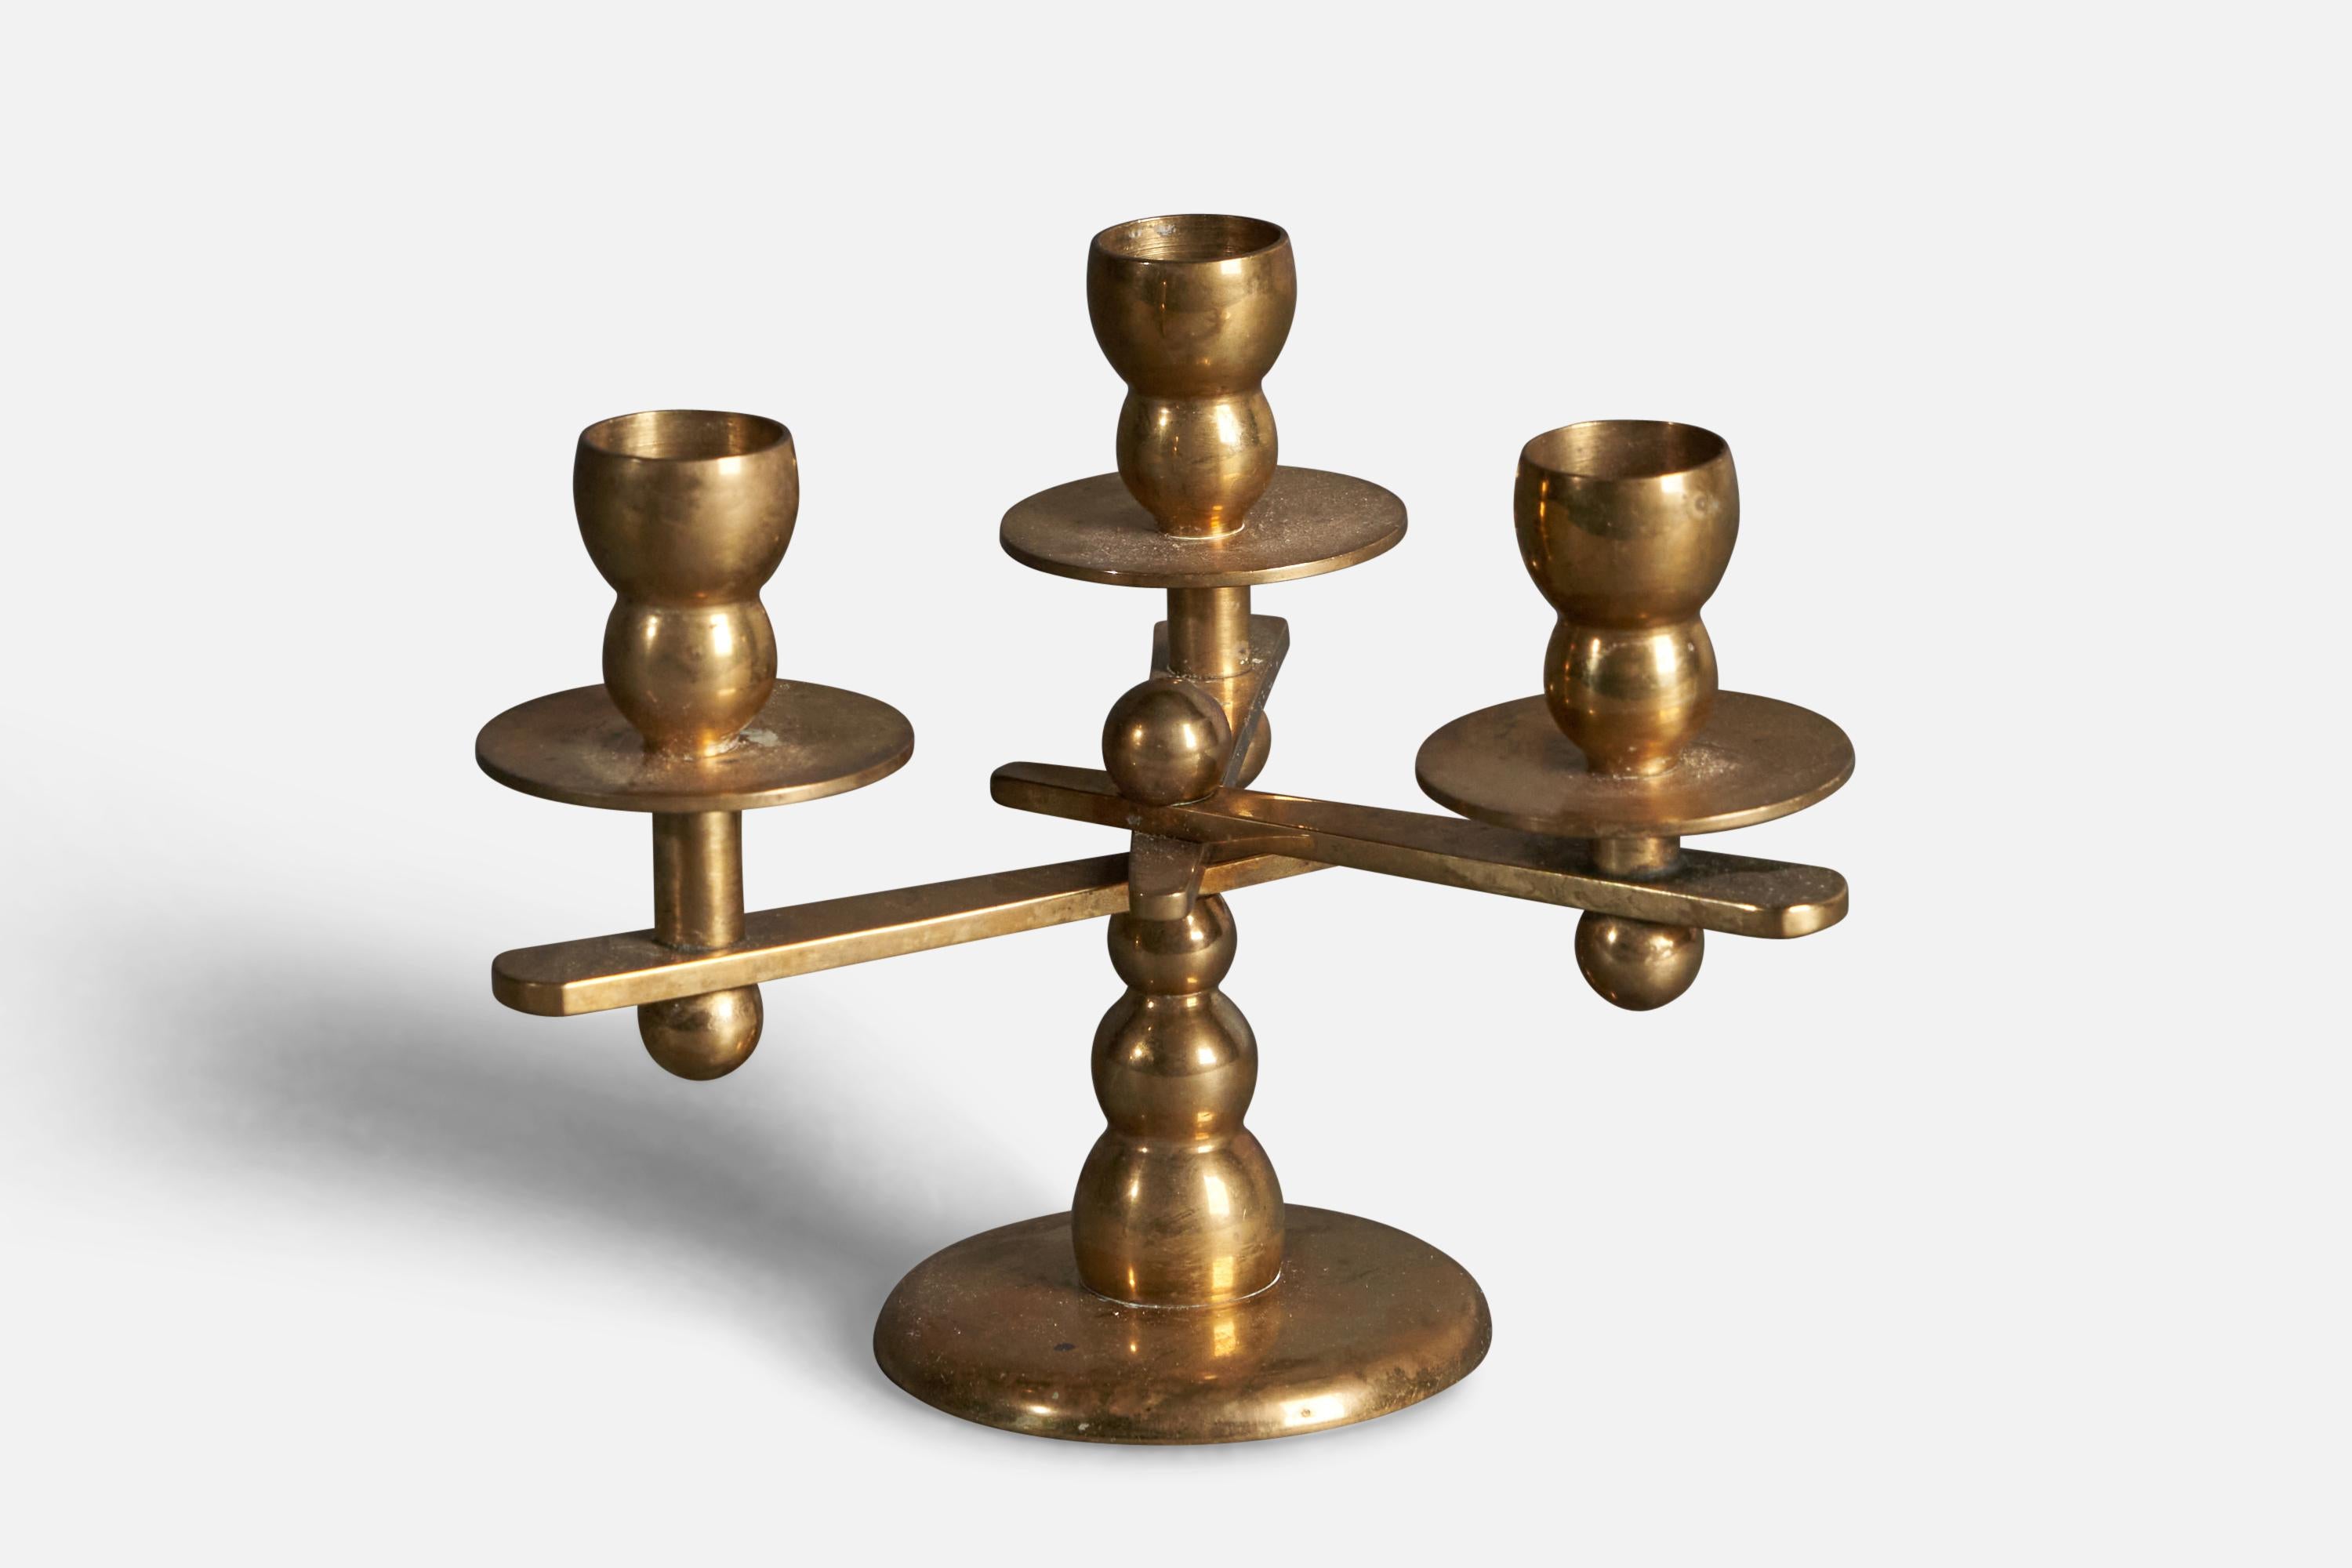 A small brass candelabra designed and produced in Denmark, c. 1960s.